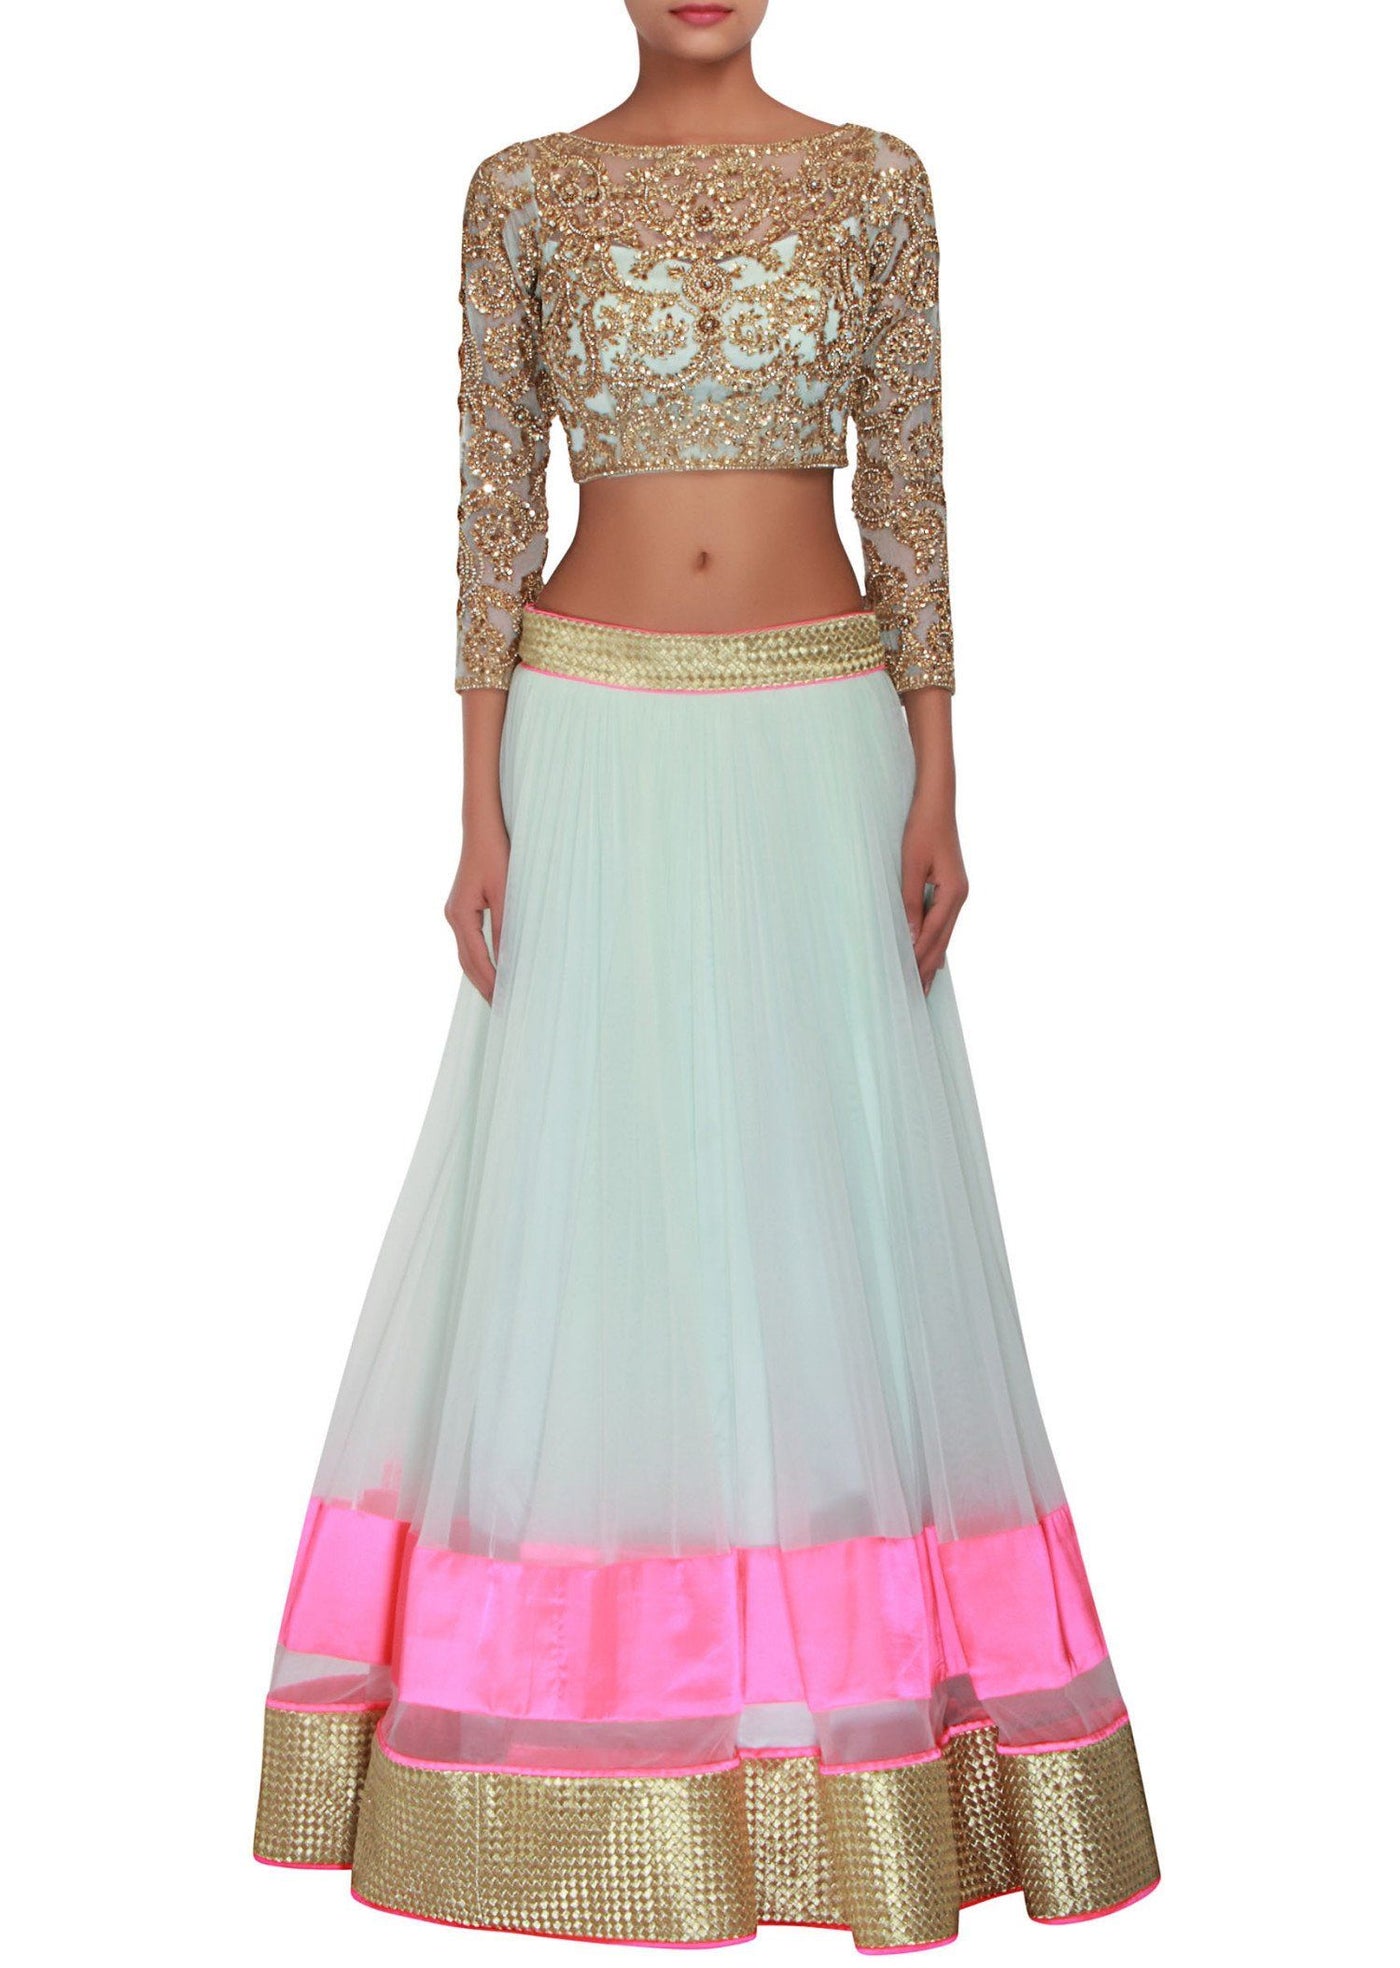 Pink and Magenta Net Lehenga - Indian Clothing in Denver, CO, Aurora, CO, Boulder, CO, Fort Collins, CO, Colorado Springs, CO, Parker, CO, Highlands Ranch, CO, Cherry Creek, CO, Centennial, CO, and Longmont, CO. Nationwide shipping USA - India Fashion X